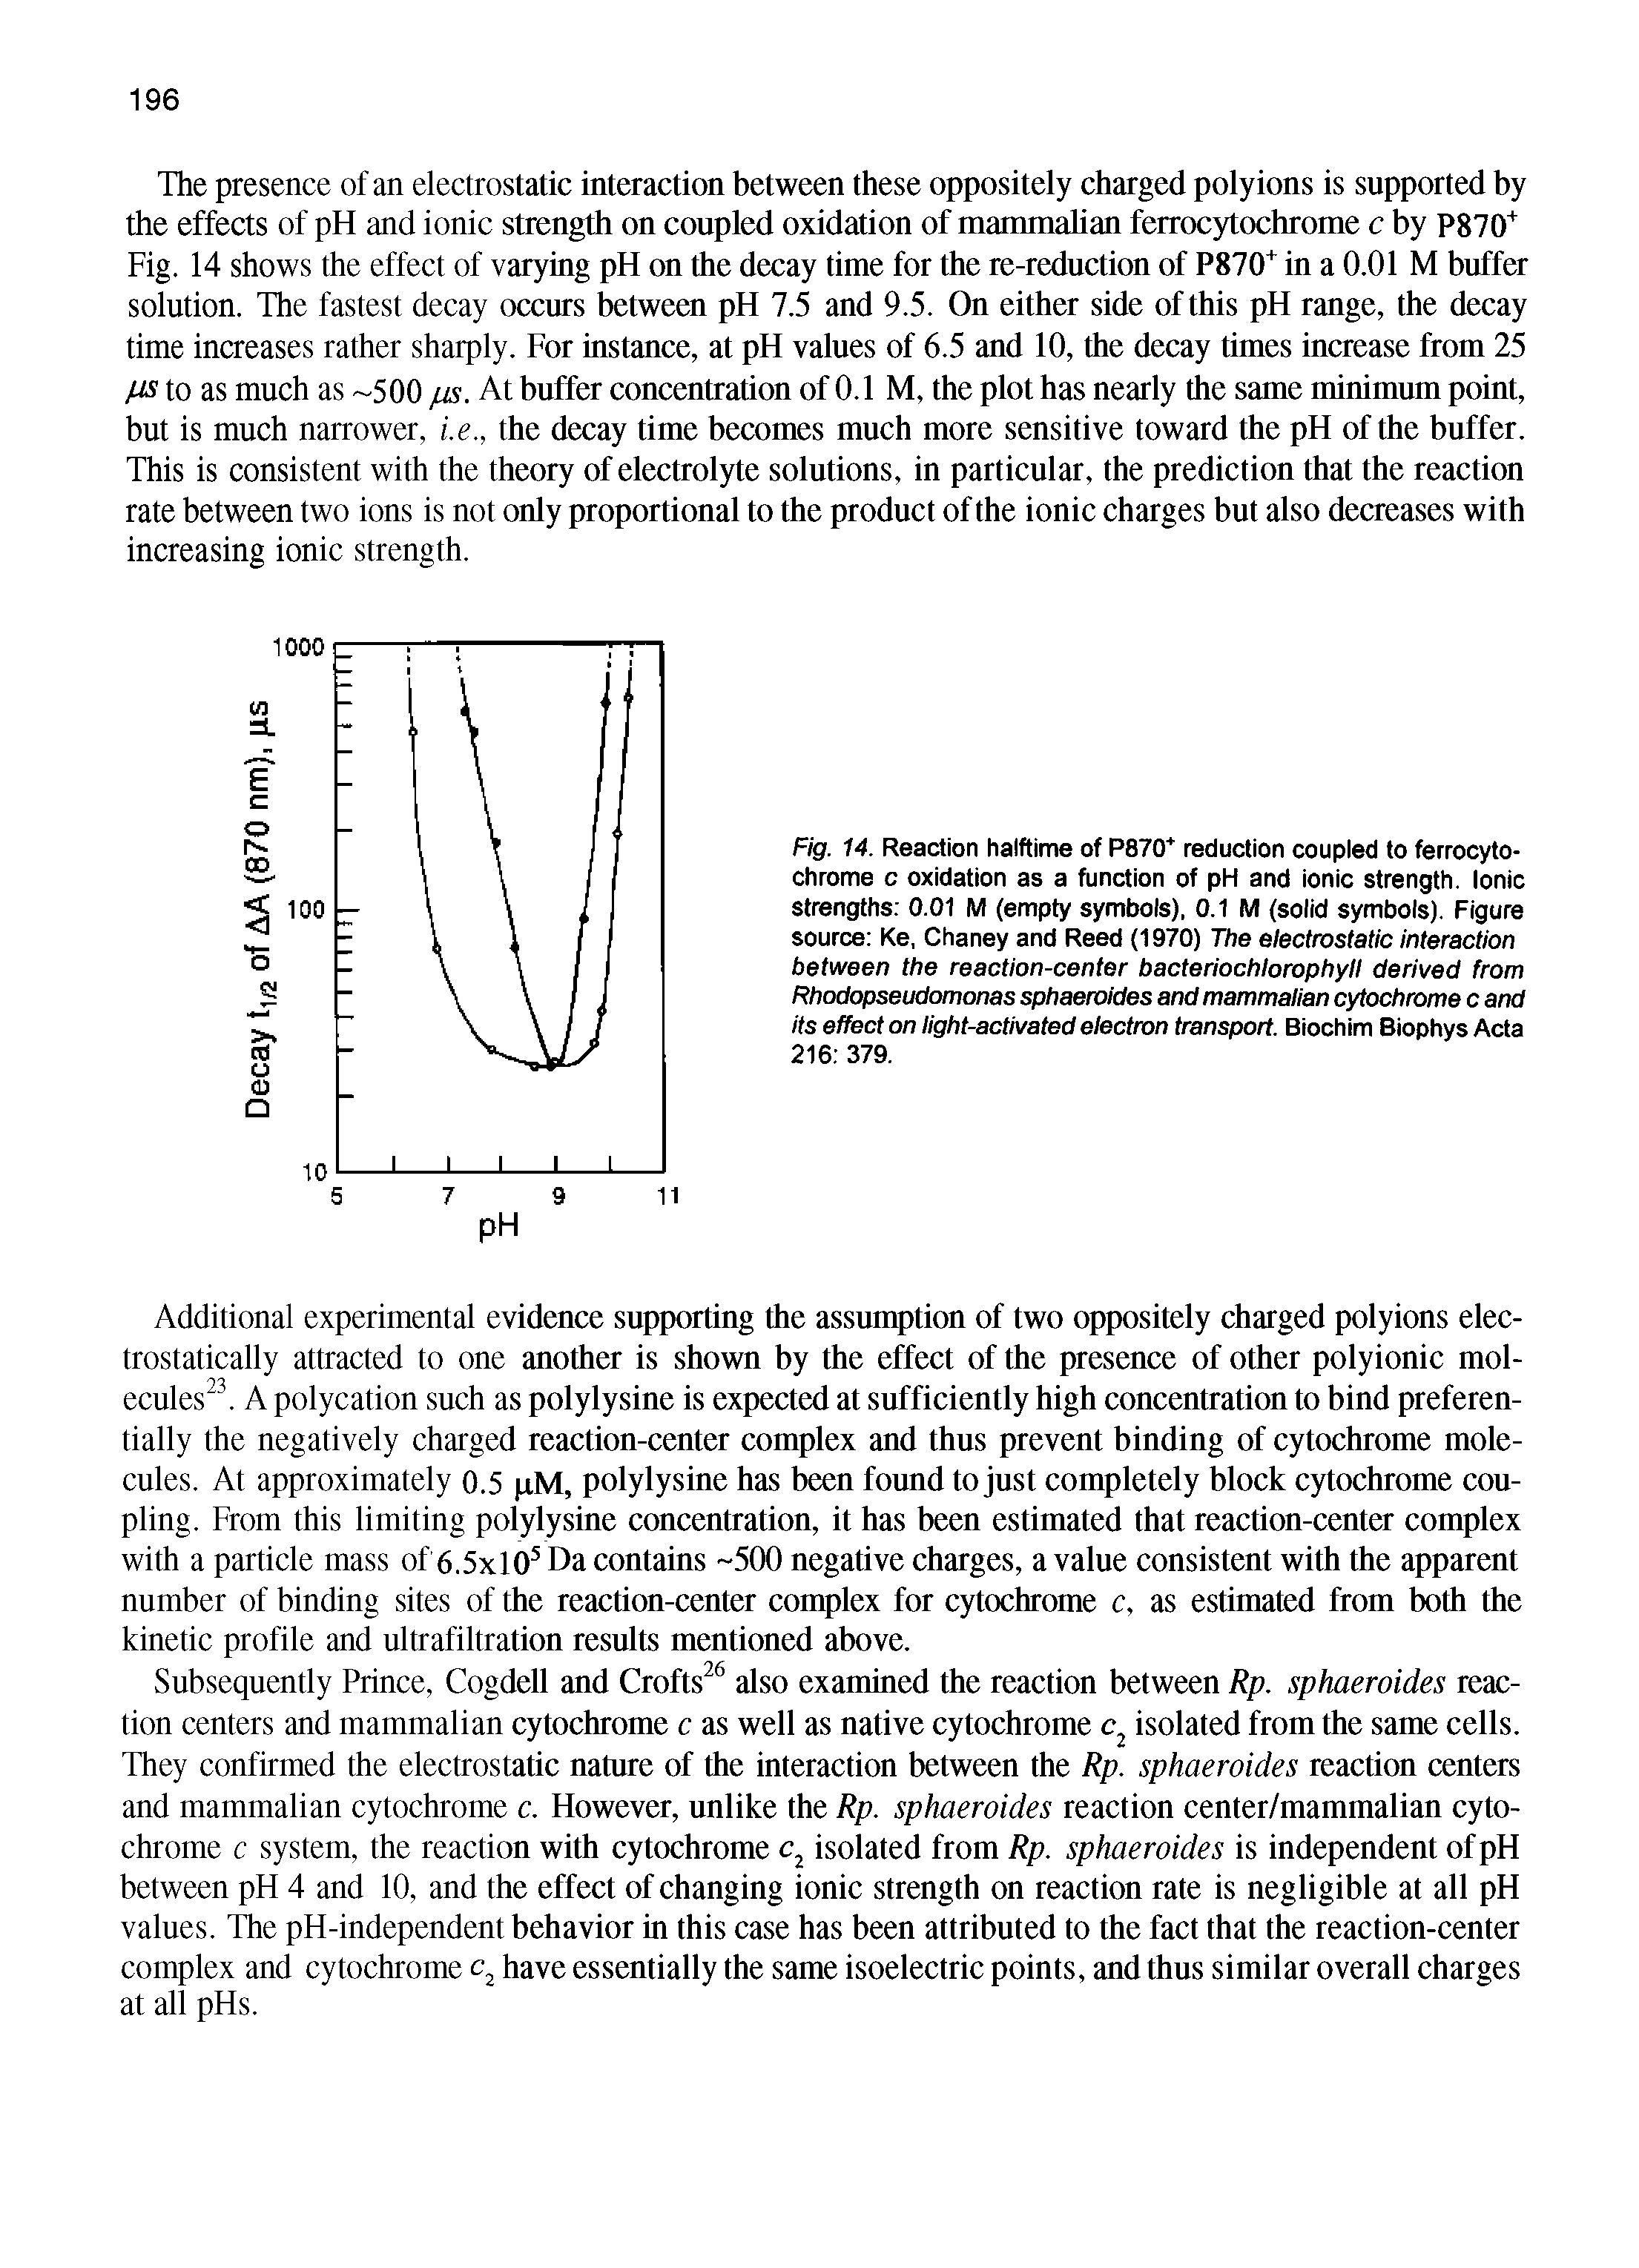 Fig. 14. Reaction halftime of P870 reduction coupled to ferrocyto-chrome c oxidation as a function of pH and ionic strength. Ionic strengths 0.01 M (empty symbols), 0.1 M (solid symbols). Figure source Ke, Chaney and Reed (1970) The electrostatic interaction between the reaction-center bacteriochlorophyll derived from Rhodopseudomonas sphaeroides and mammalian cytochrome c and its effect on light-activated electron transport. Biochim Biophys Acta 216 379.